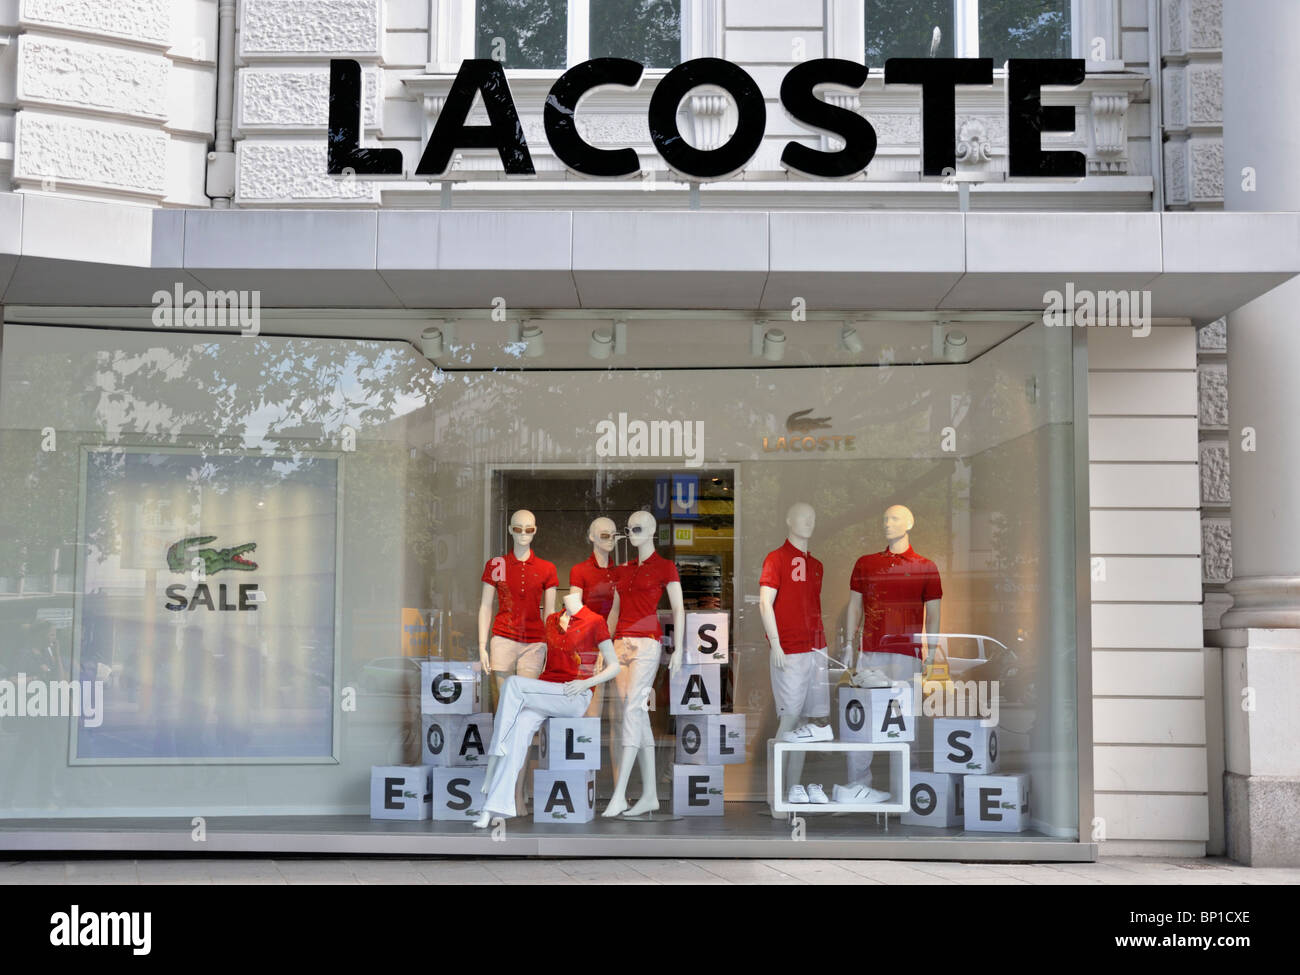 Lacoste clothing store display with sale signs showing summer sales 2010 in  Kurfurstendamm Berlin Germany Stock Photo - Alamy